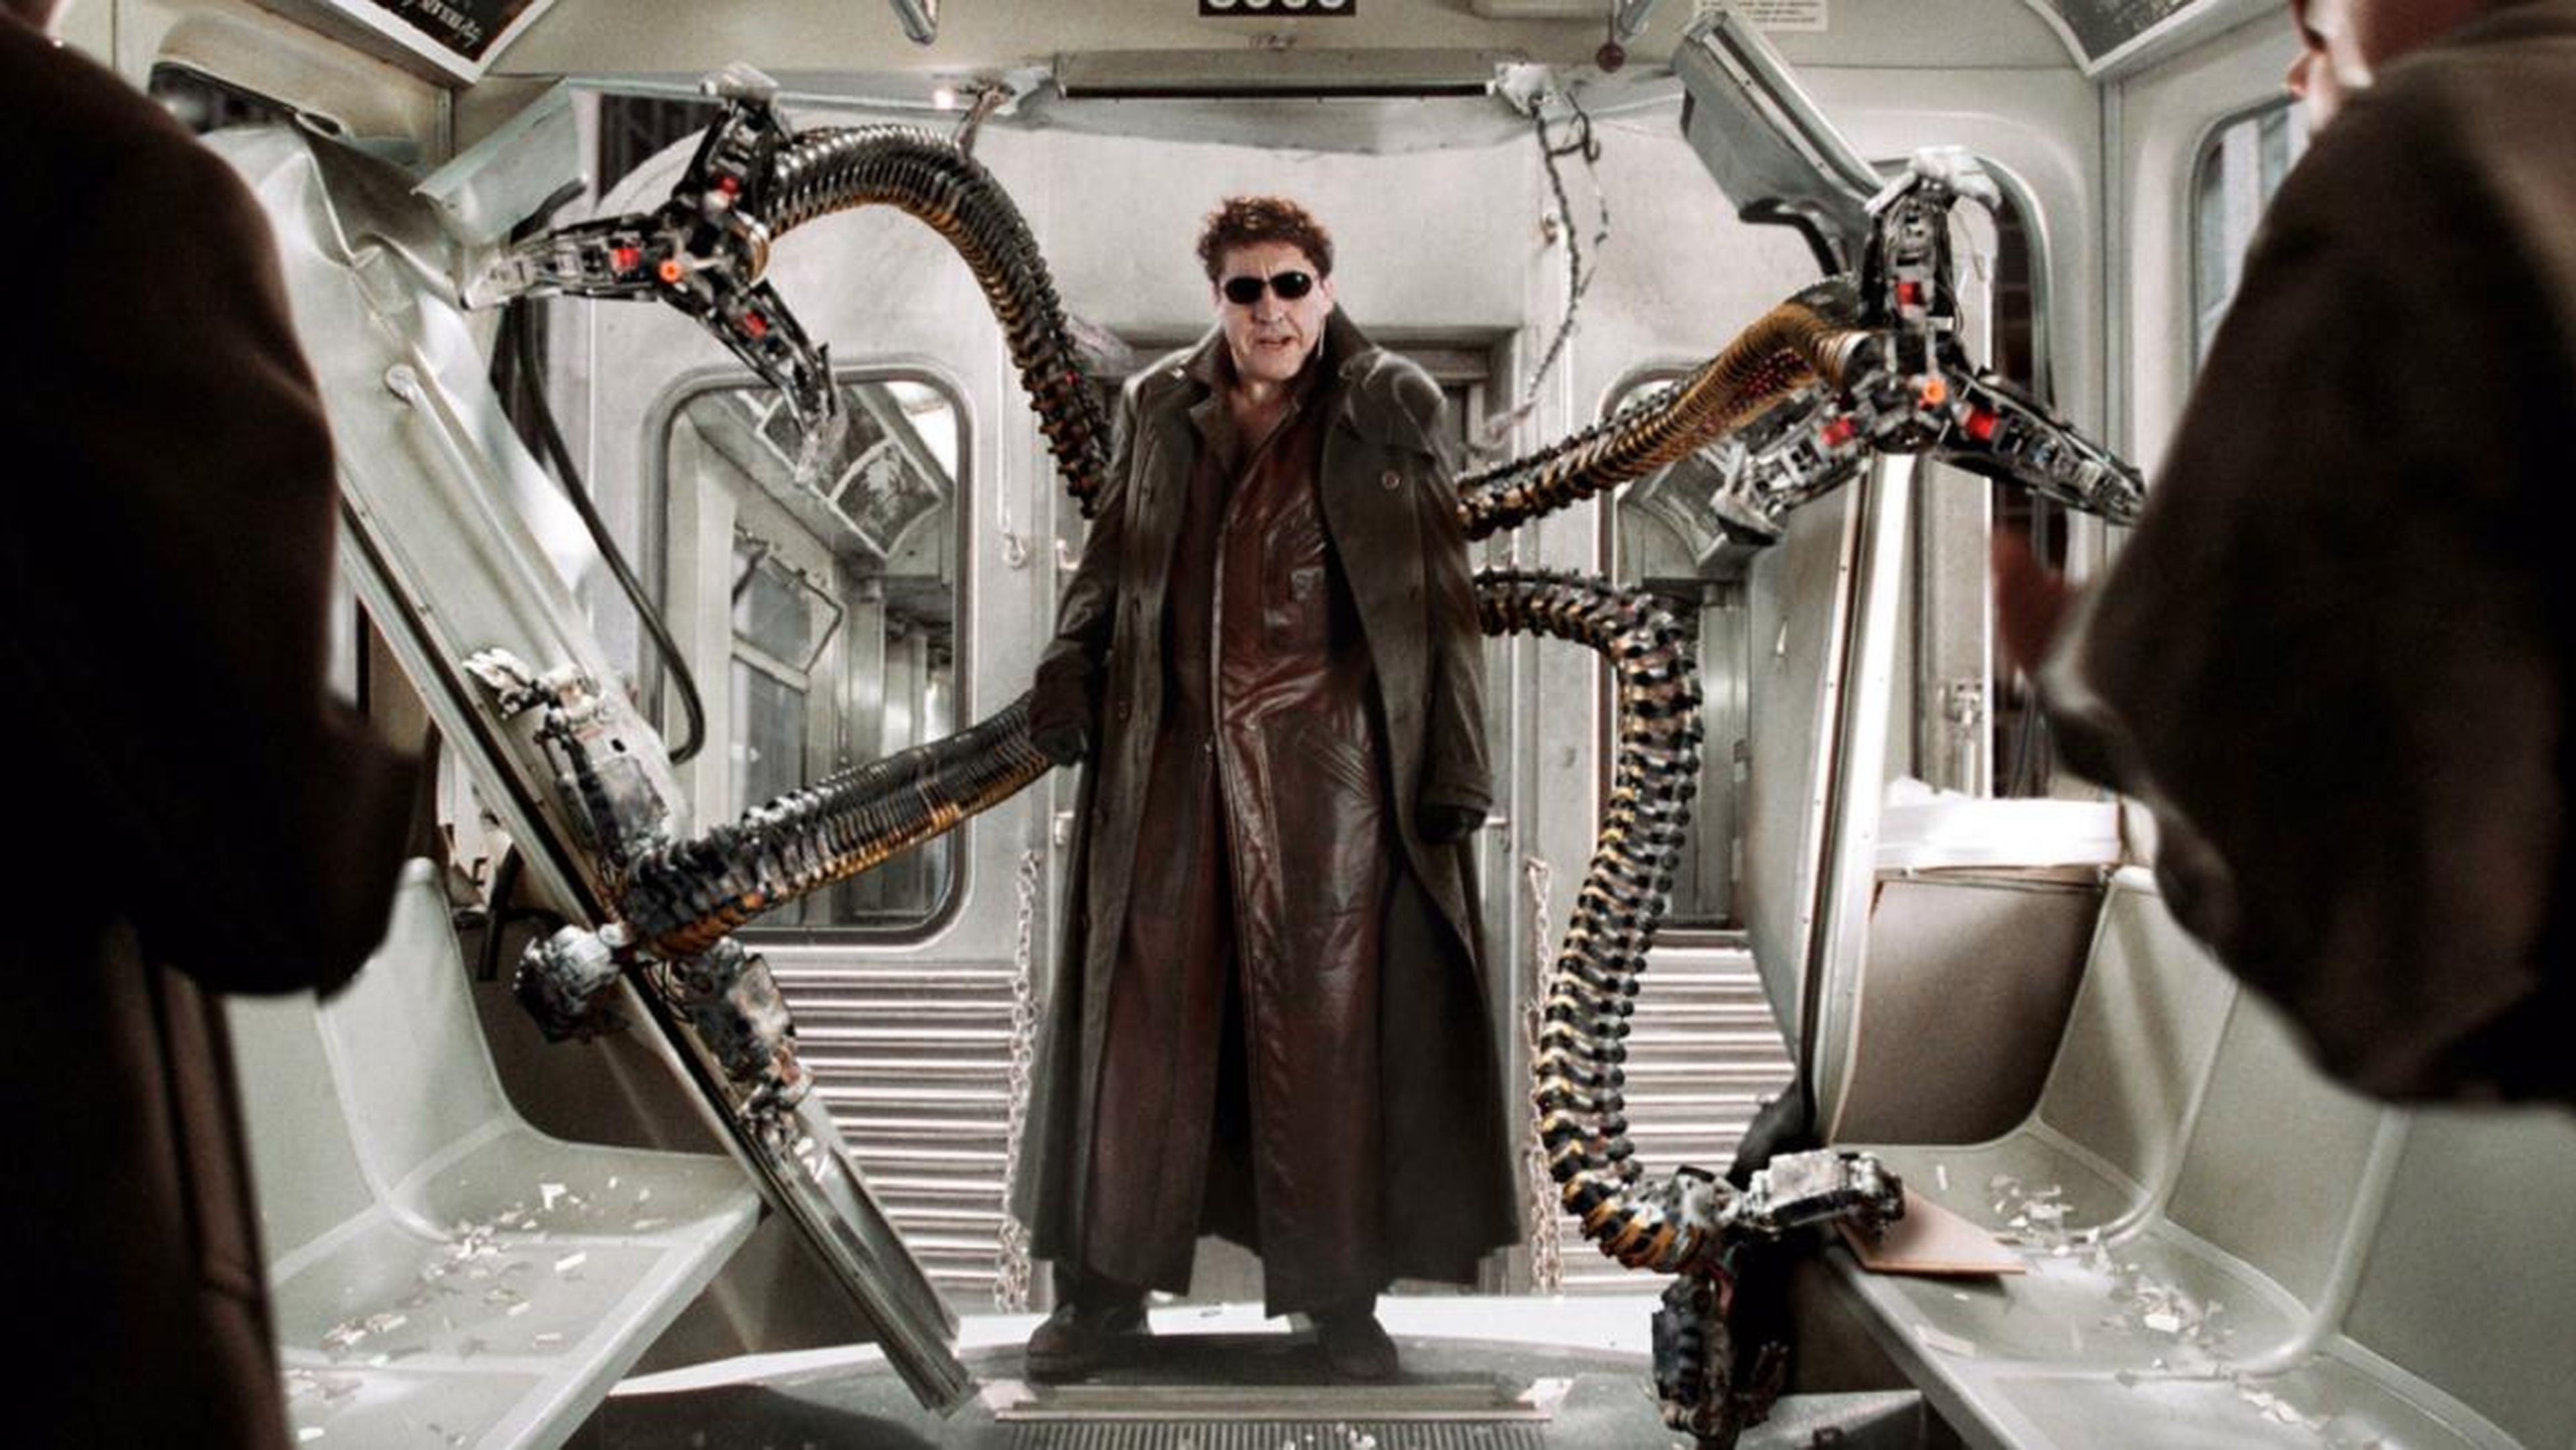 7. Alfred Molina as Otto Octavius/Doctor Octopus in "Spider-Man 2"